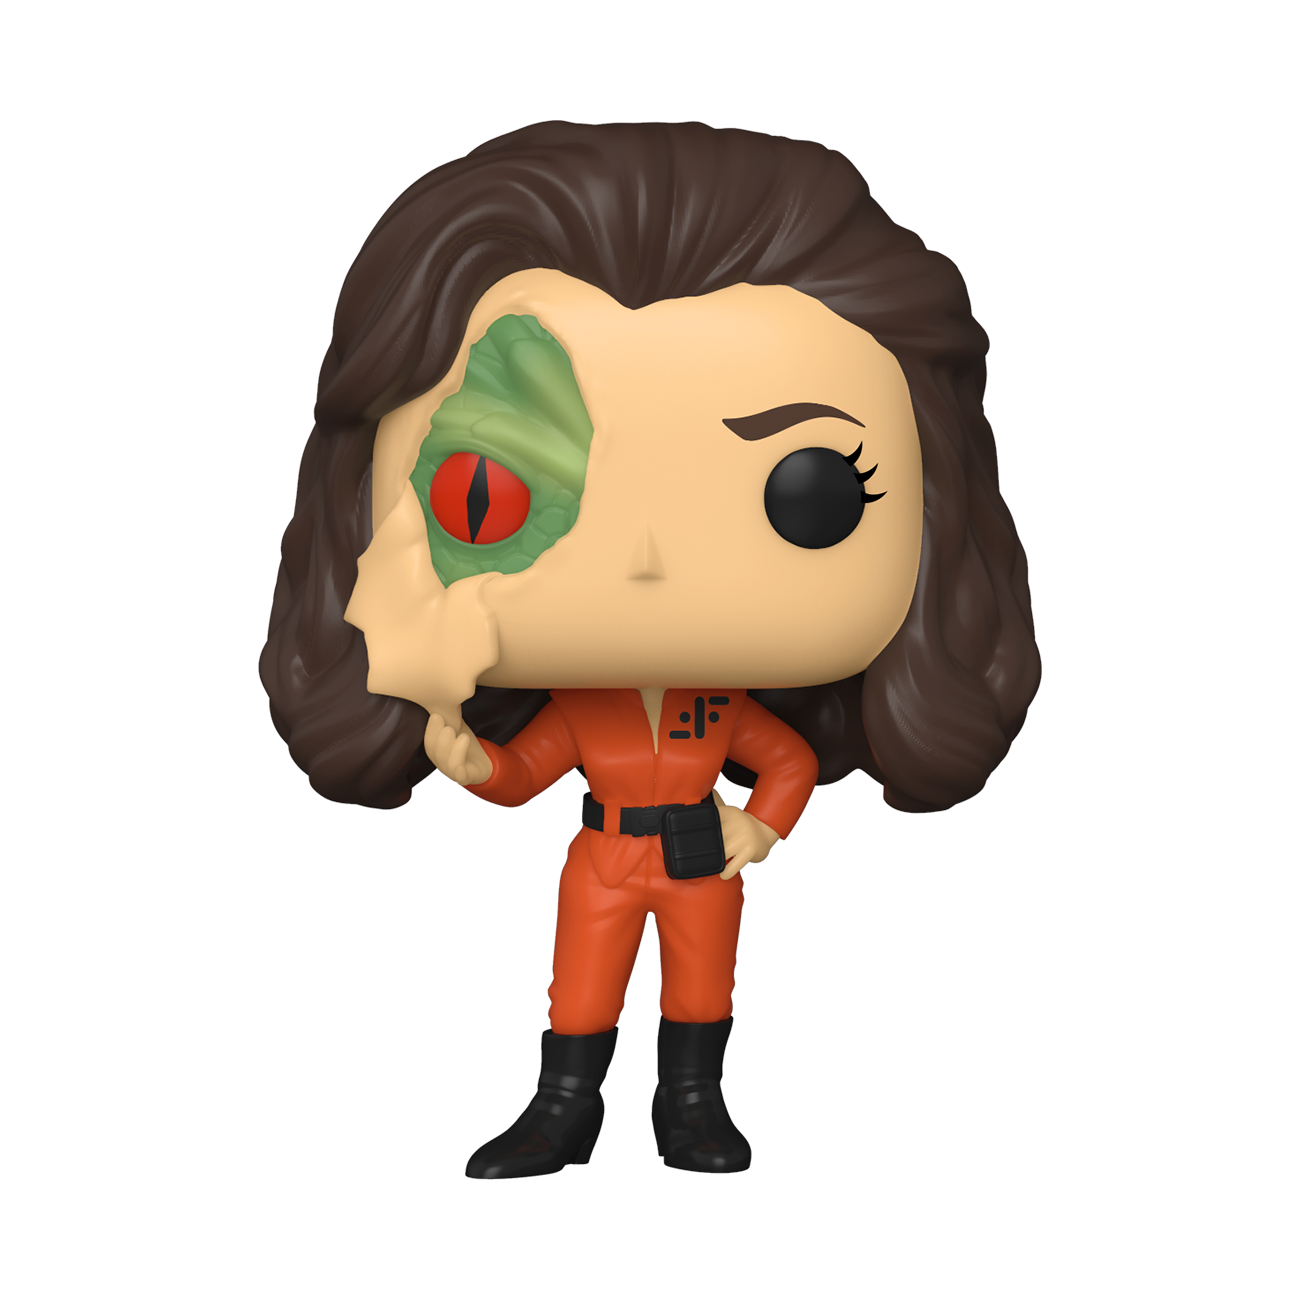 V - Diana with Lizard Face ECCC 2021 Spring Convention Exclusive Pop! Vinyl